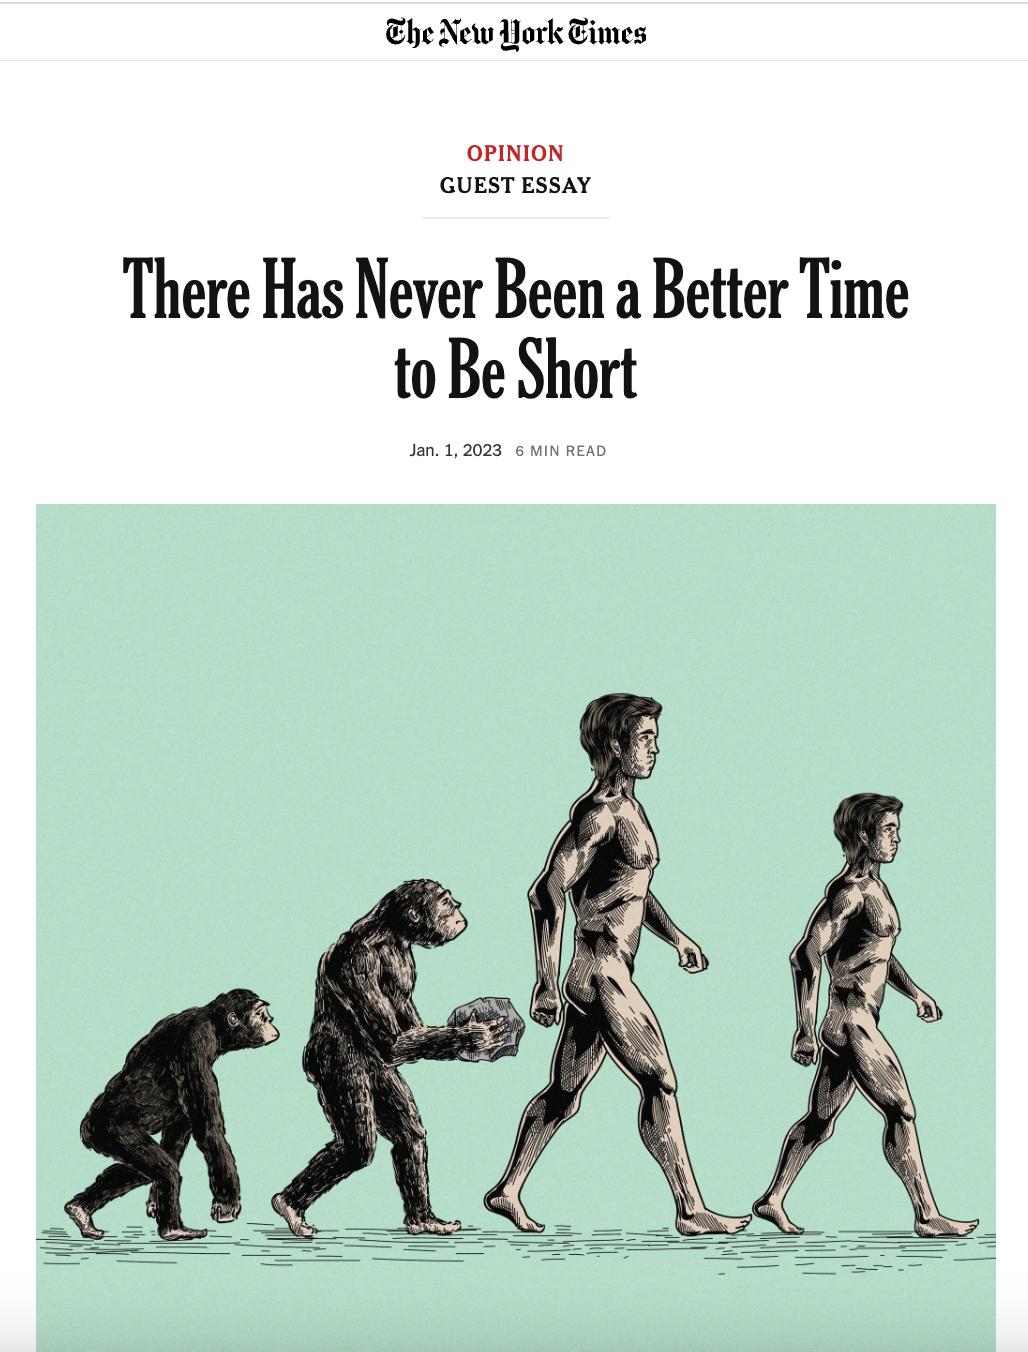 New York Times: ‘There Has Never Been a Better Time to Be Short’ – ‘Mate with shorter people’ for ‘a greener planet’ & to save ‘the planet by shrinking the needs of subsequent generations’